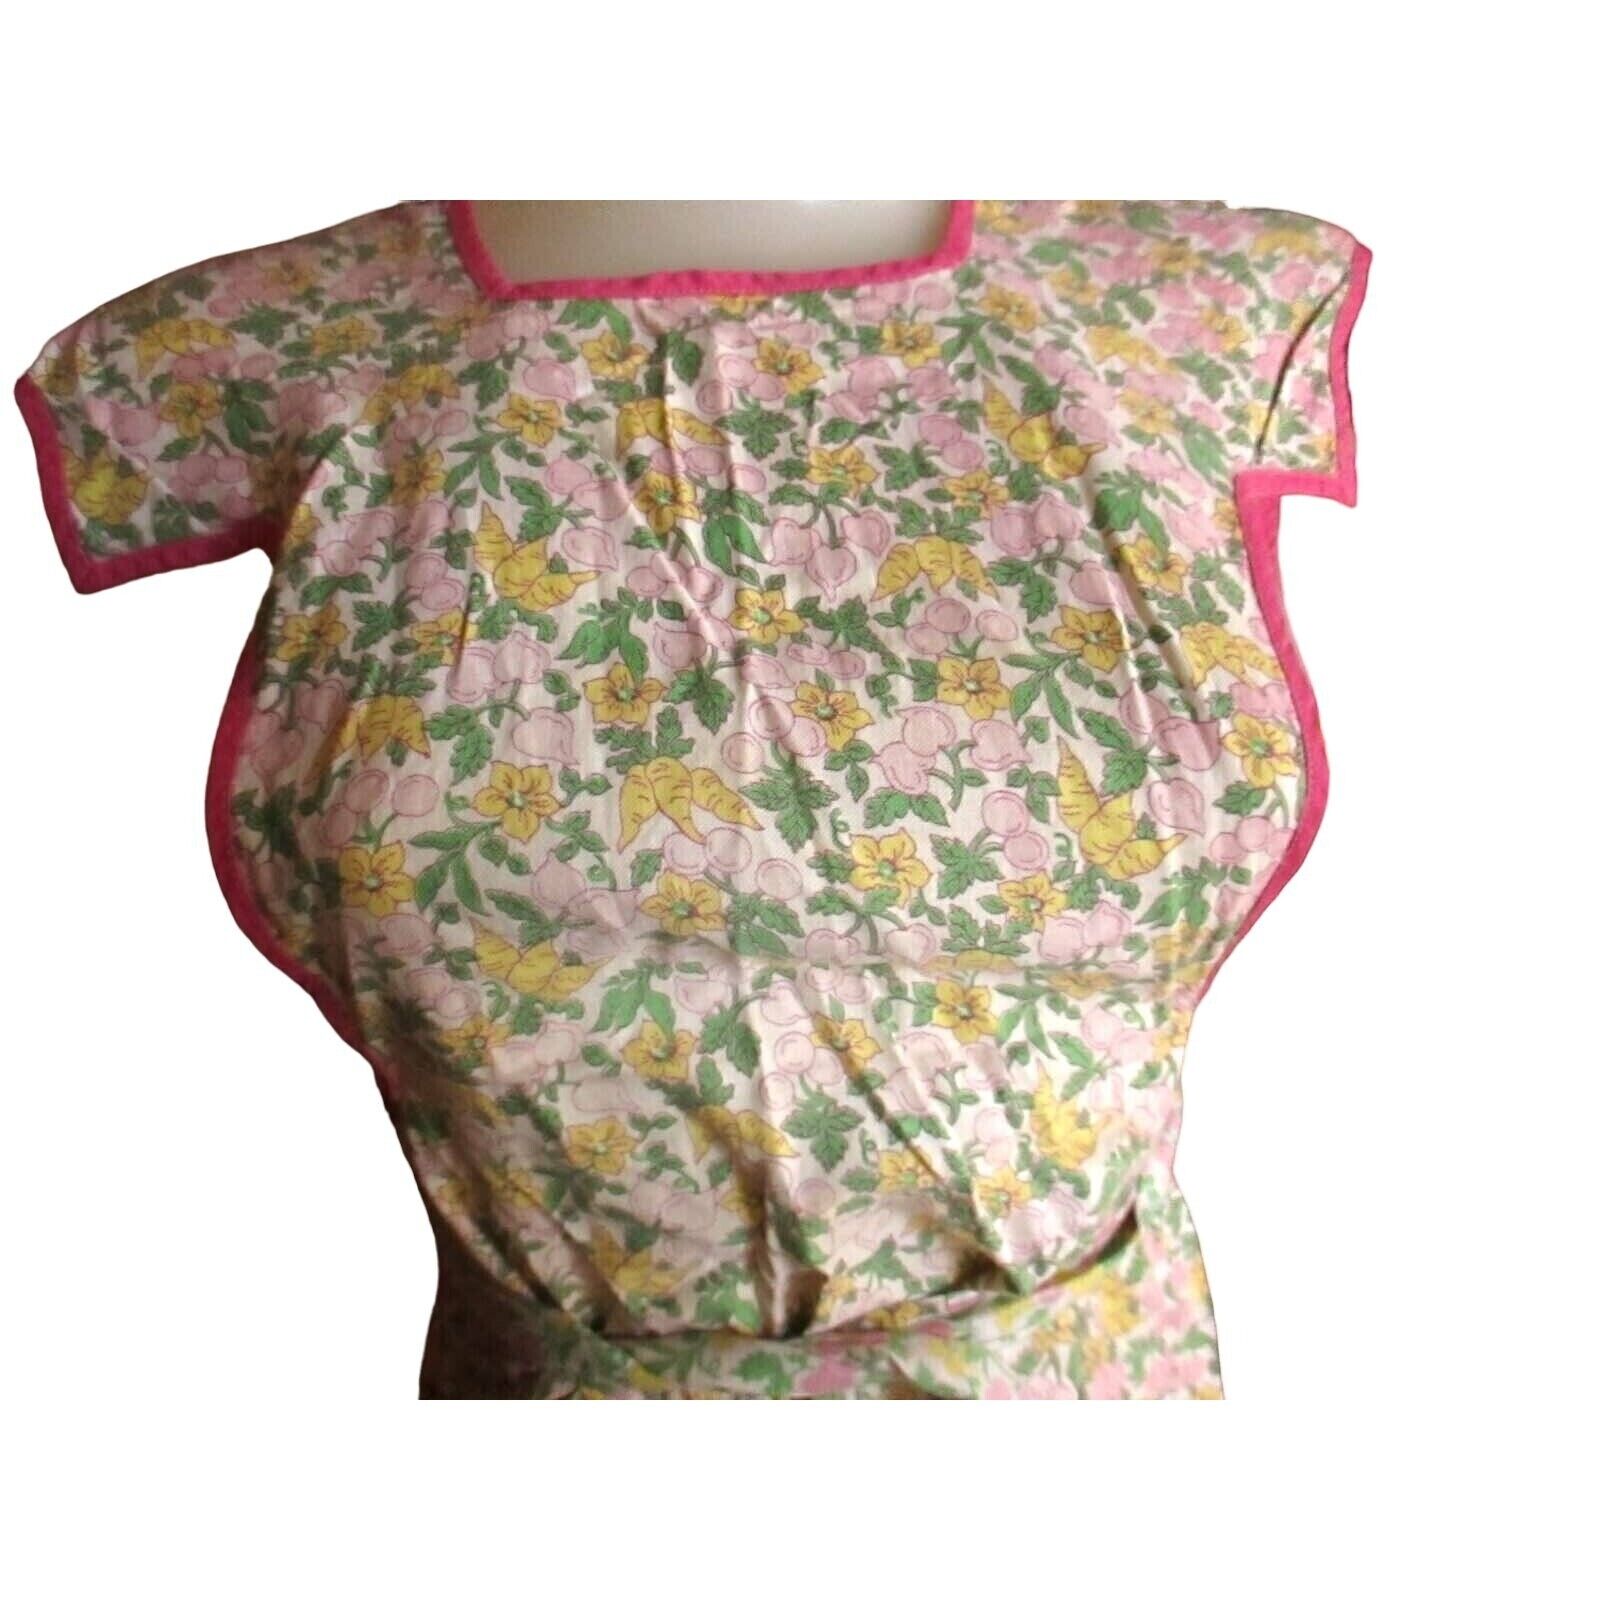 Small Womens Vintage Apron MCM 1940s Pink Vegetable Print Sexy with Red Trim